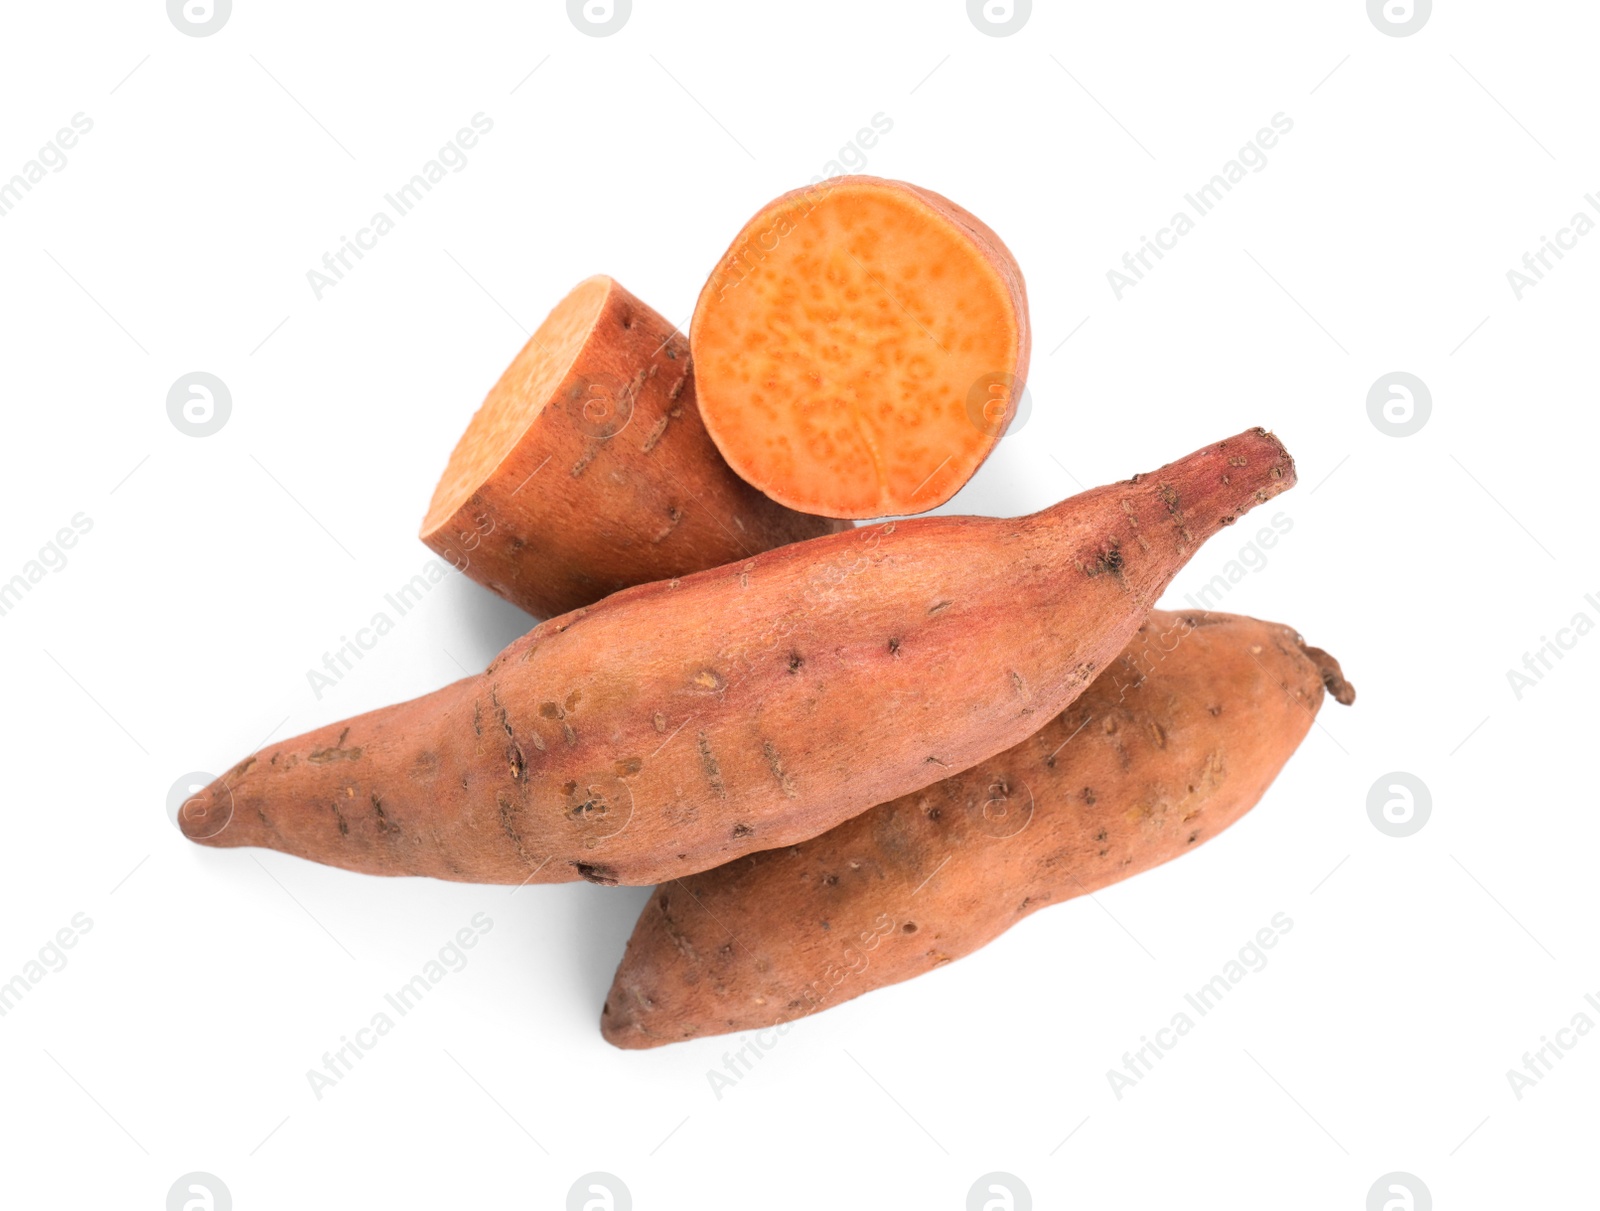 Photo of Whole and cut ripe sweet potatoes on white background, top view